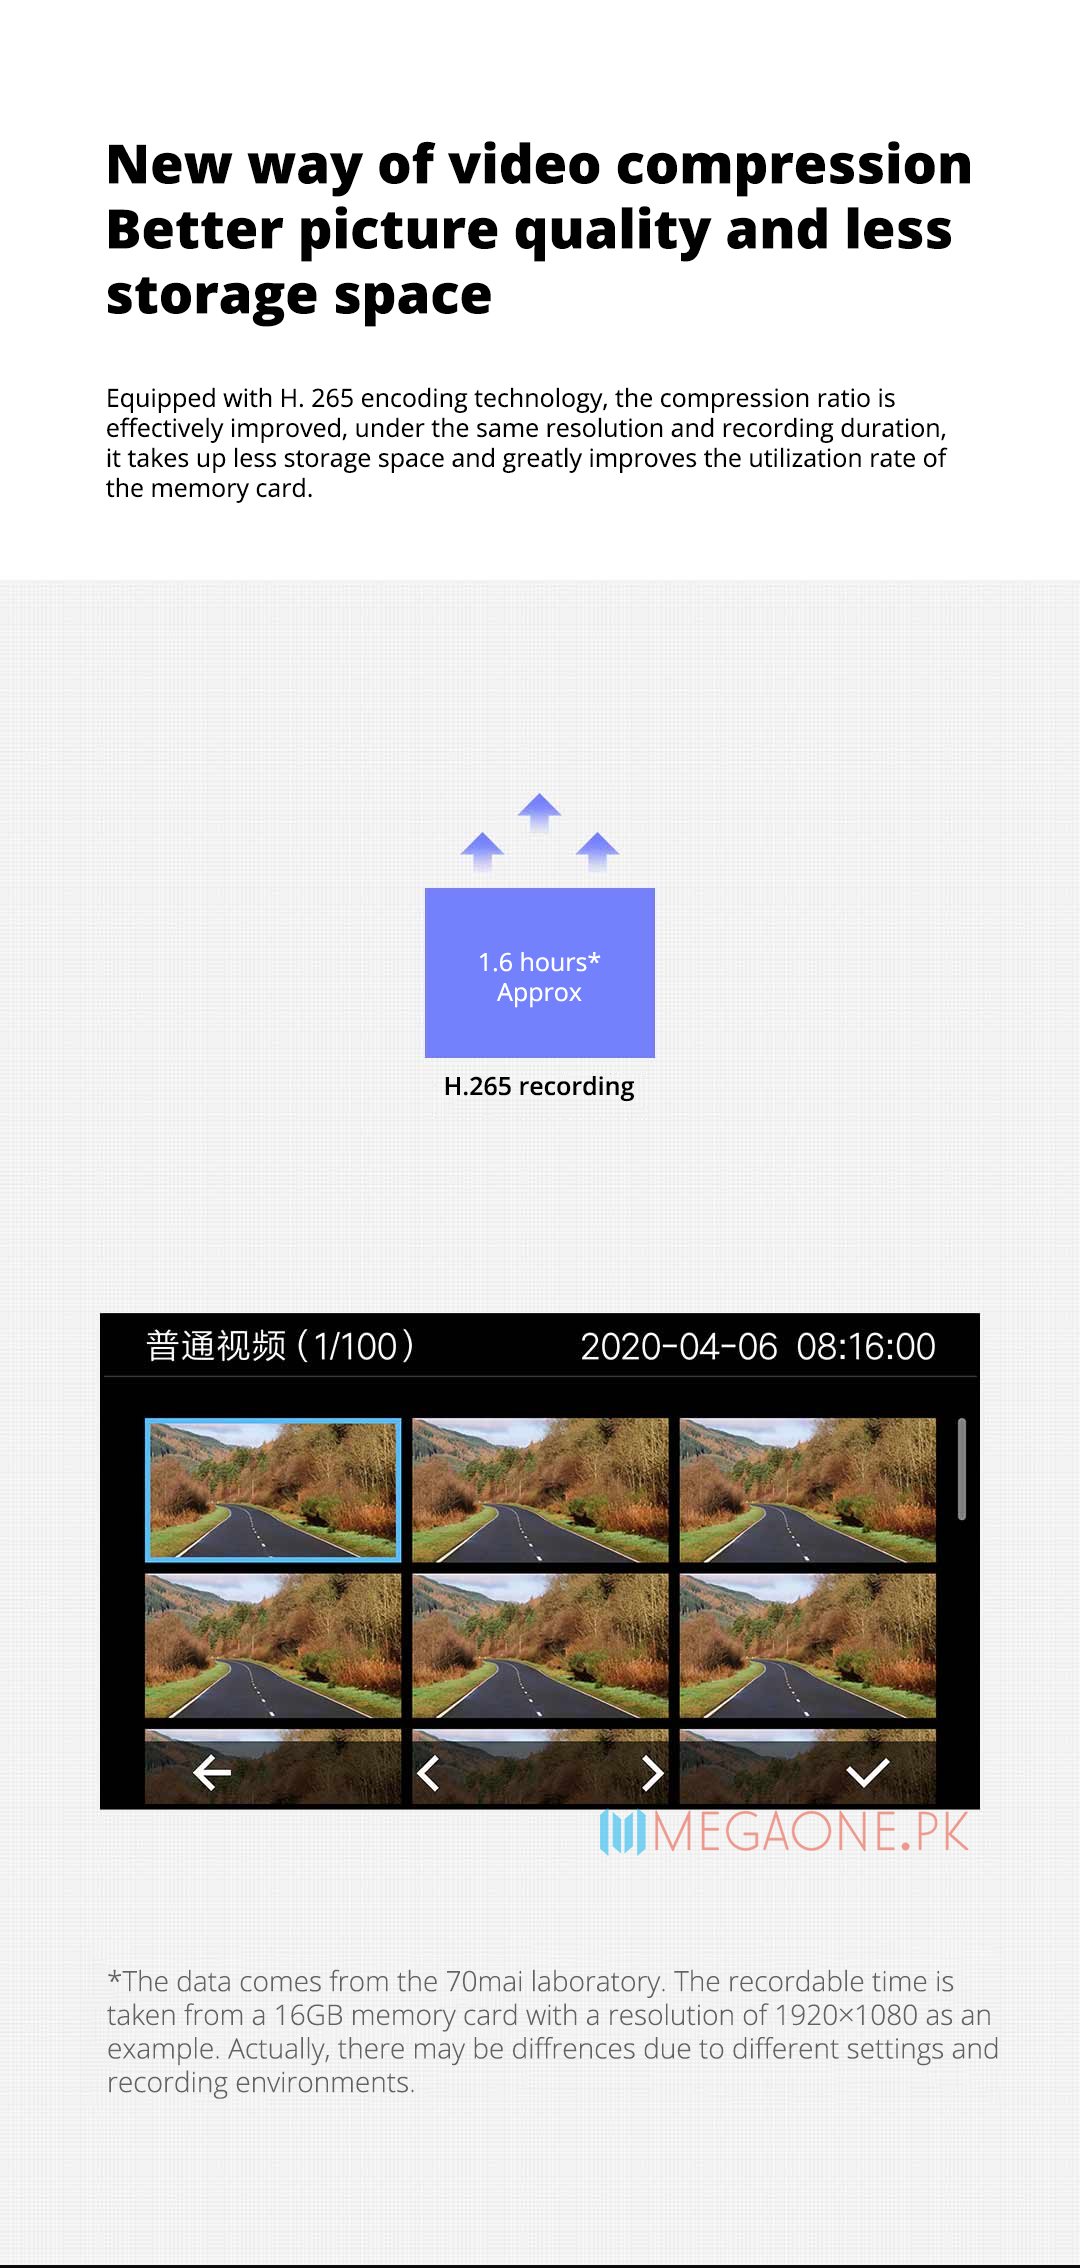 Equipped with H. 265 encoding technology, the compression ratio is effectively improved, under the same resolution and recording duration, it takes up less storage space and greatly improves the utilization rate of the memory card.